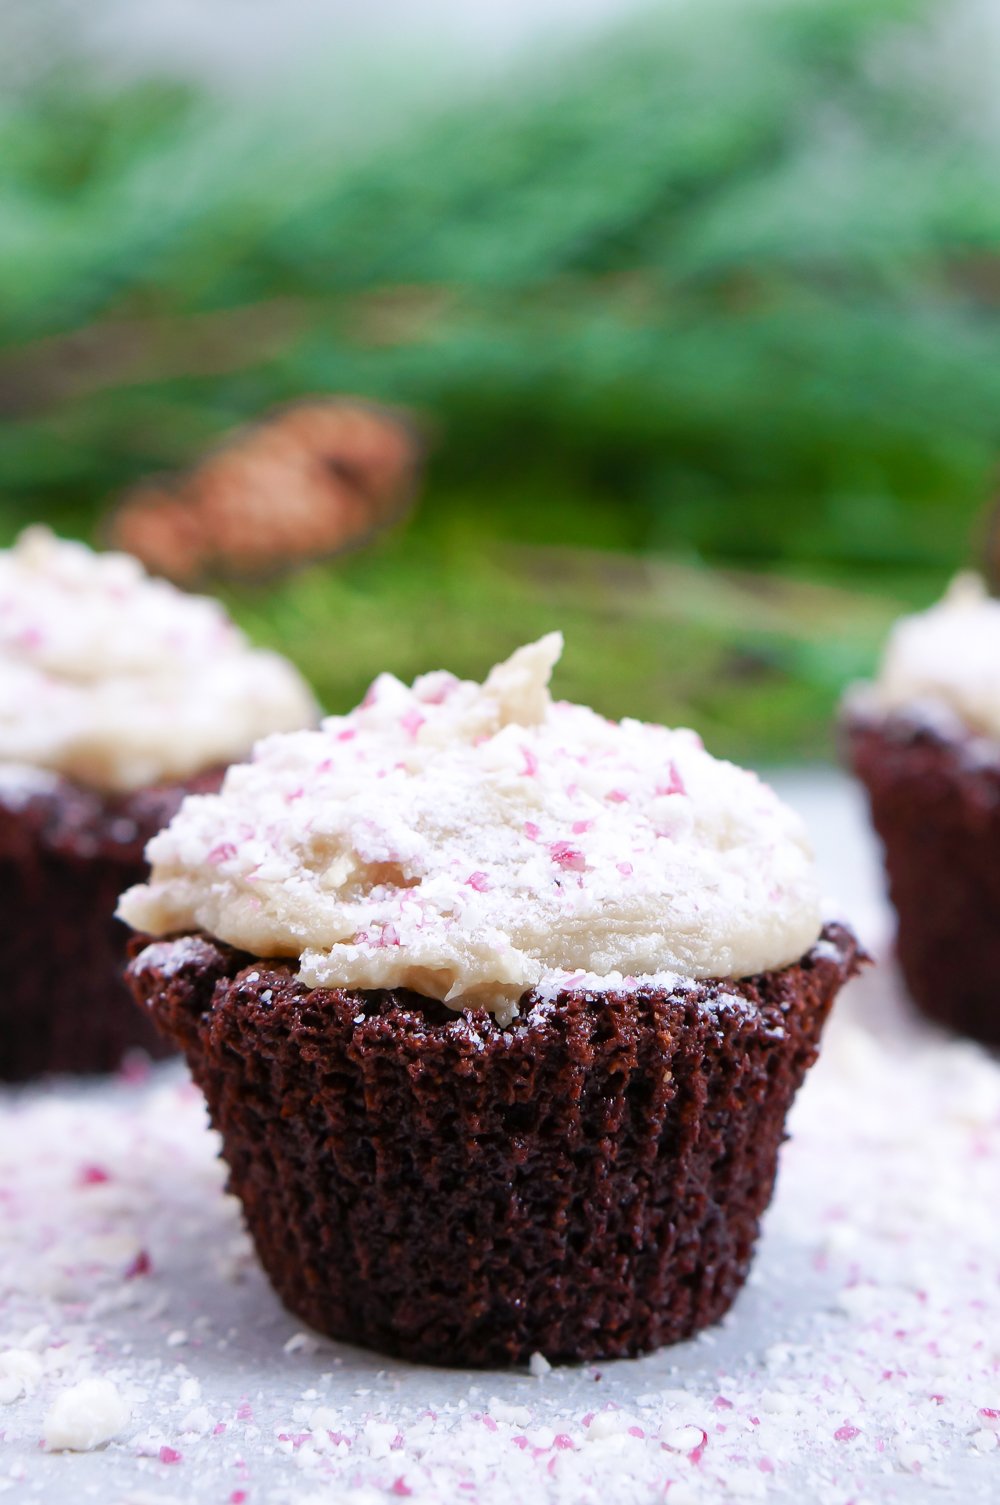 Snow-Dusted Healthy Chocolate Peppermint Cupcakes (Gluten Free, Grain Free, Refined Sugar Free)